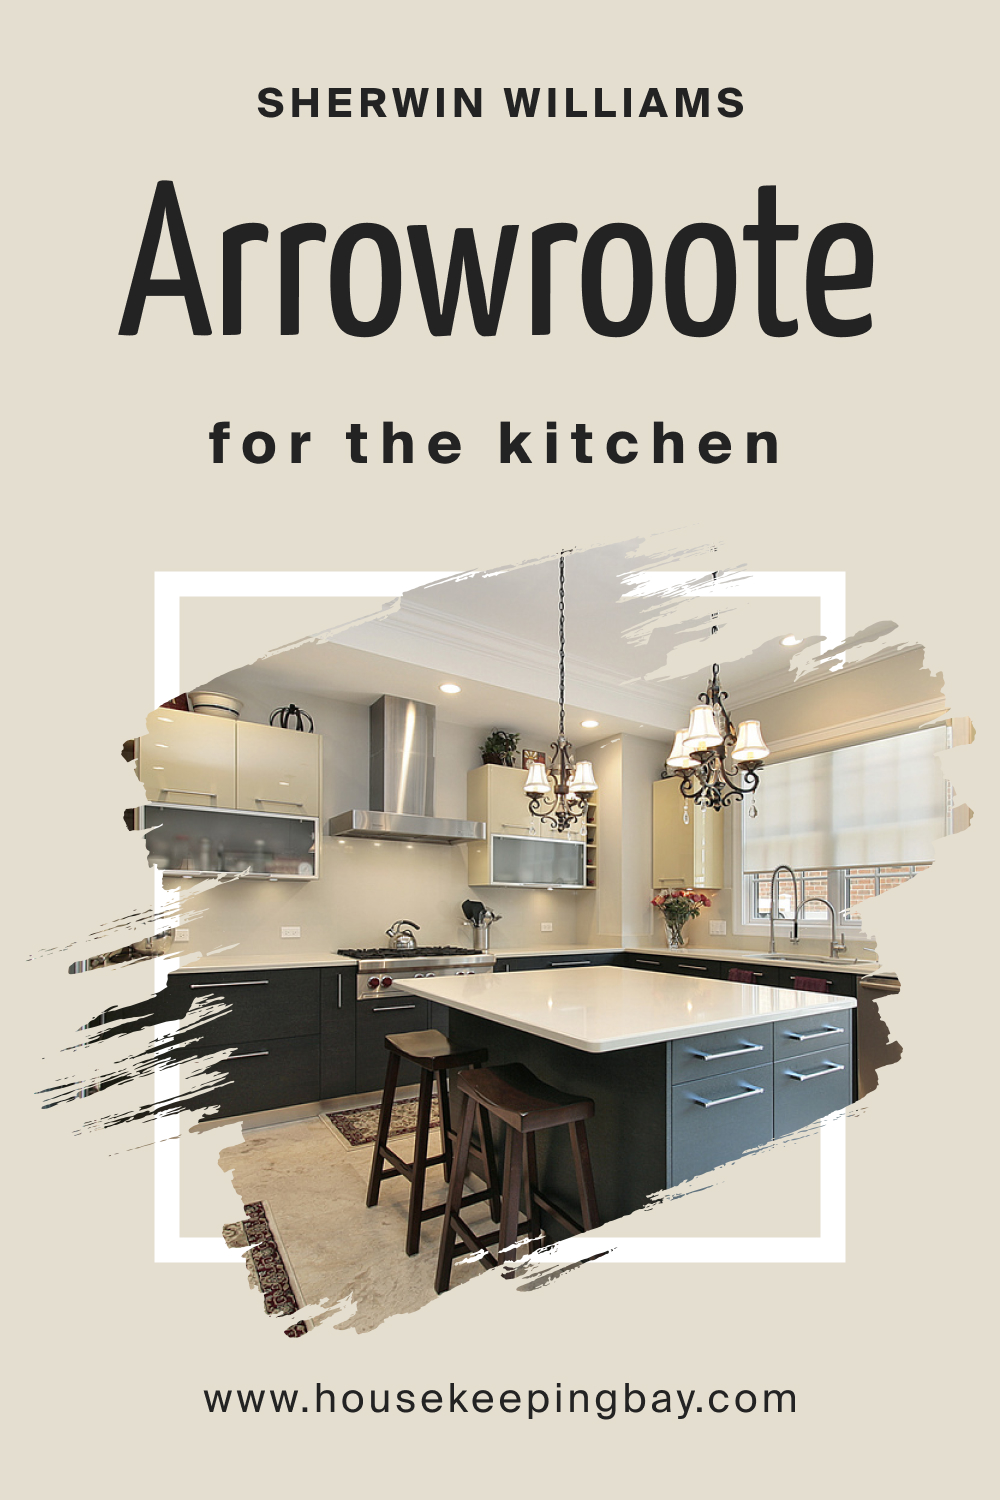 Sherwin Williams. SW 9502 Arrowroote For the Kitchens